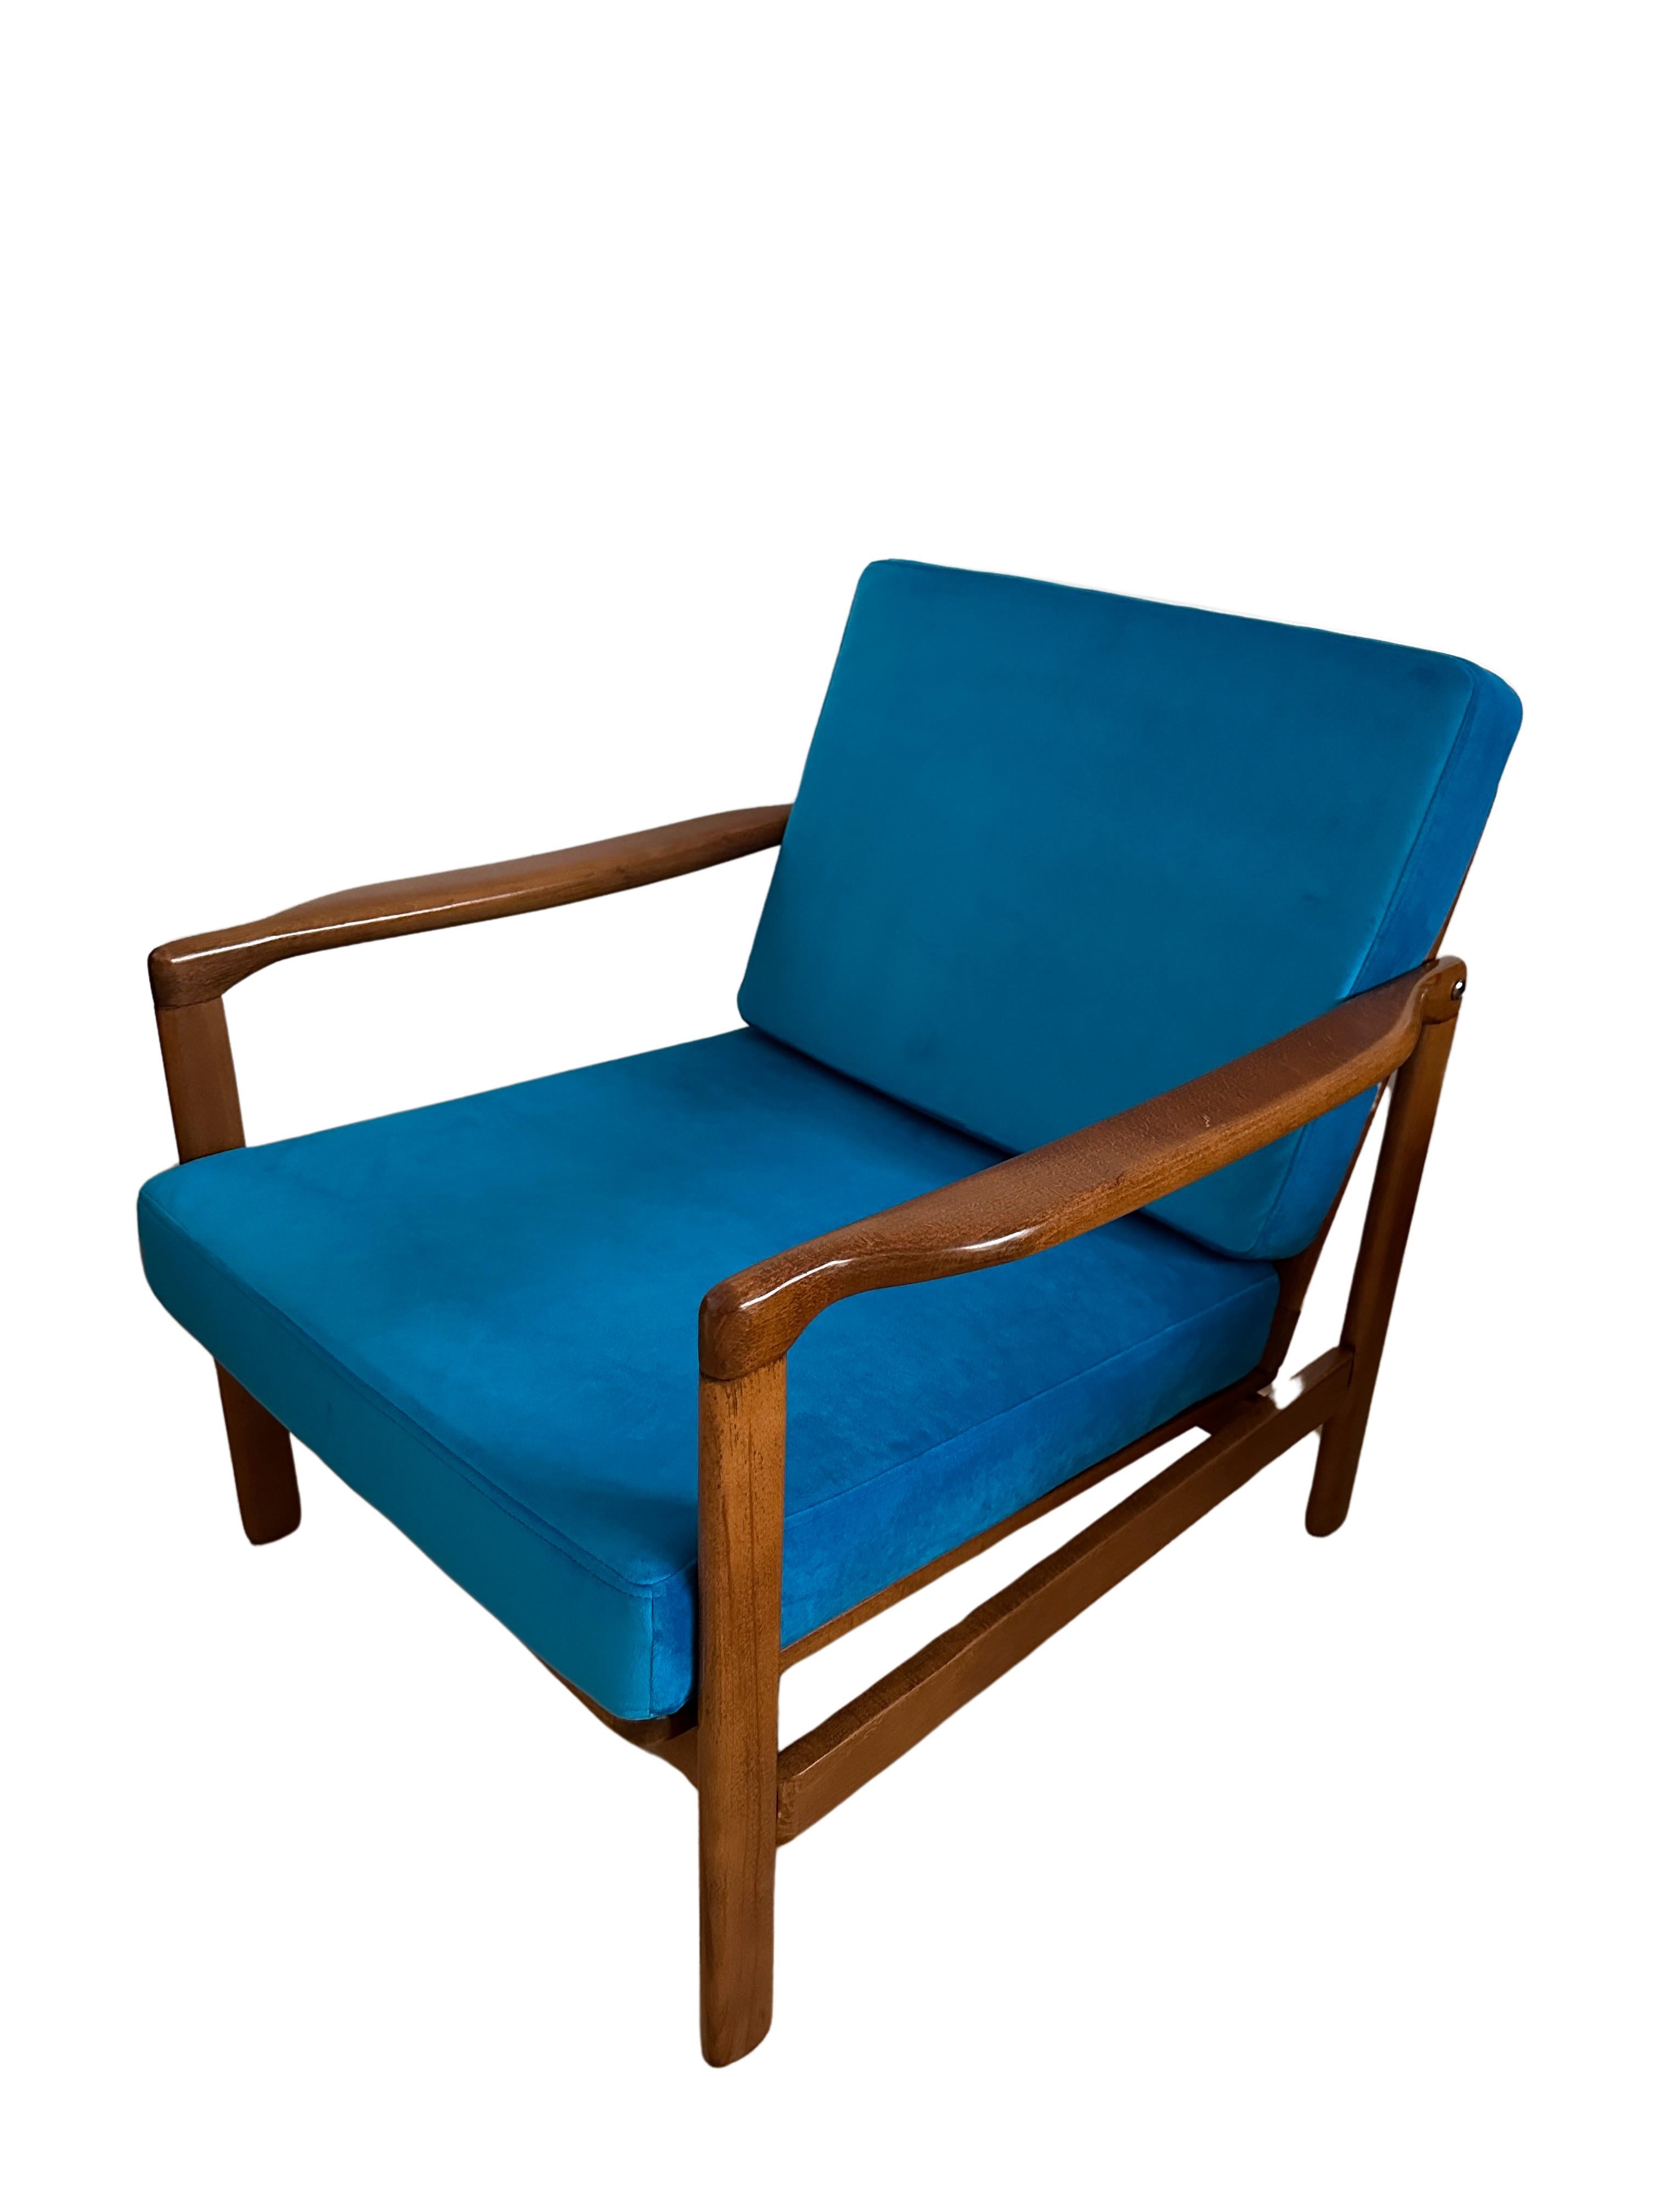 Very comfortable lounge chairs model B-7752, designed by Zenon Baczyk, has been manufactured by Swarzedzkie Fabryki Mebli in Poland in the 1960s. 

The structure is made of beech wood in deep honey brown color, finished with a semi matte varnish.